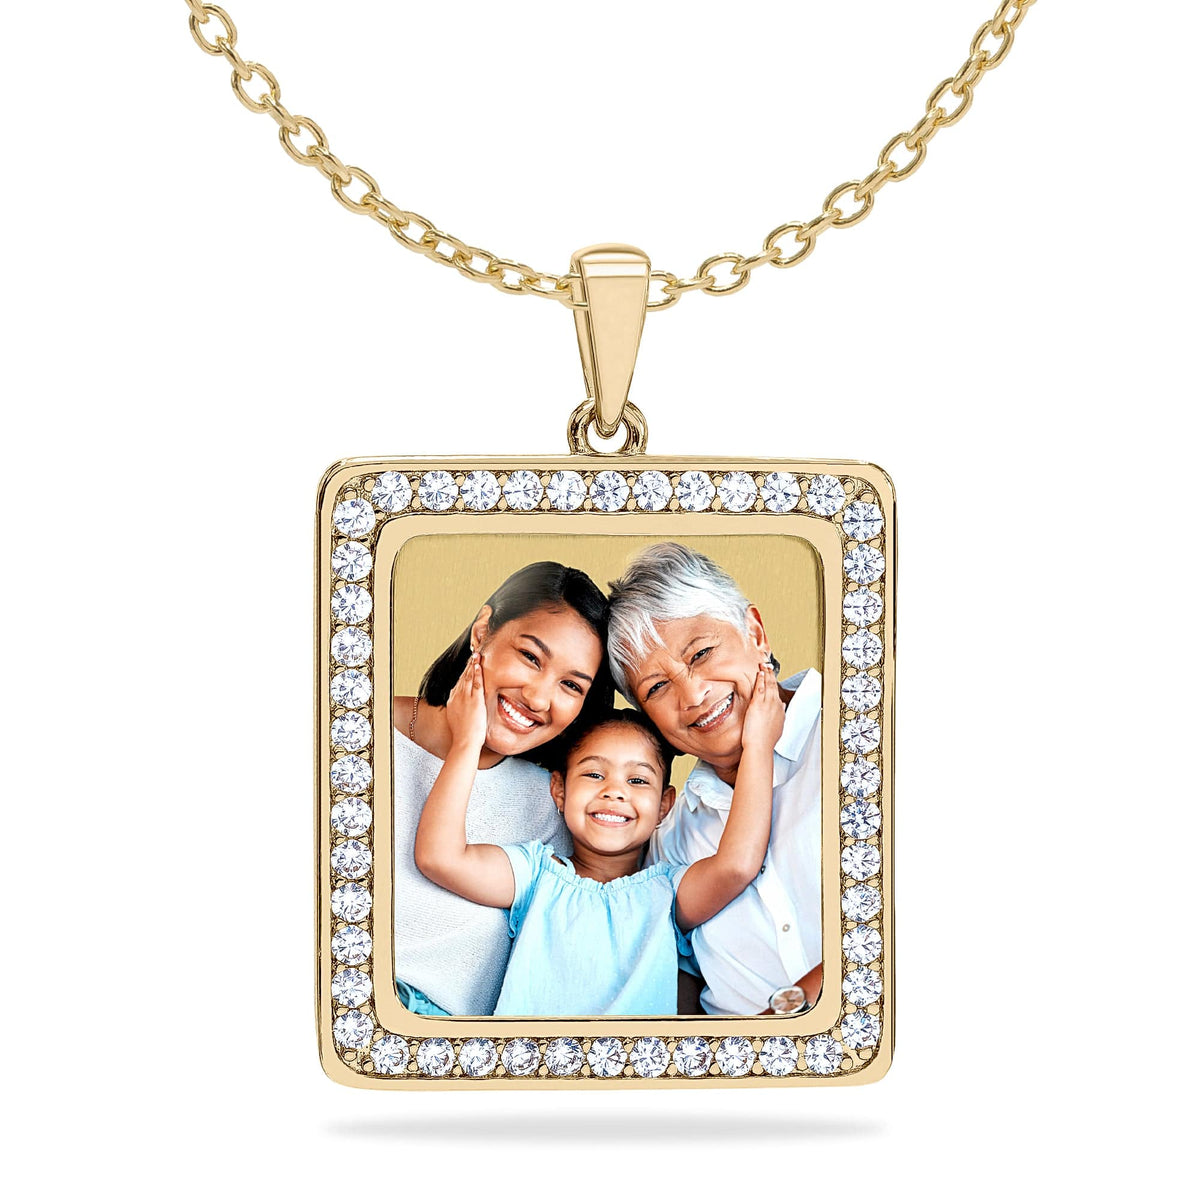 Gold Plated / Link Chain Square Photo Pendant with Stones